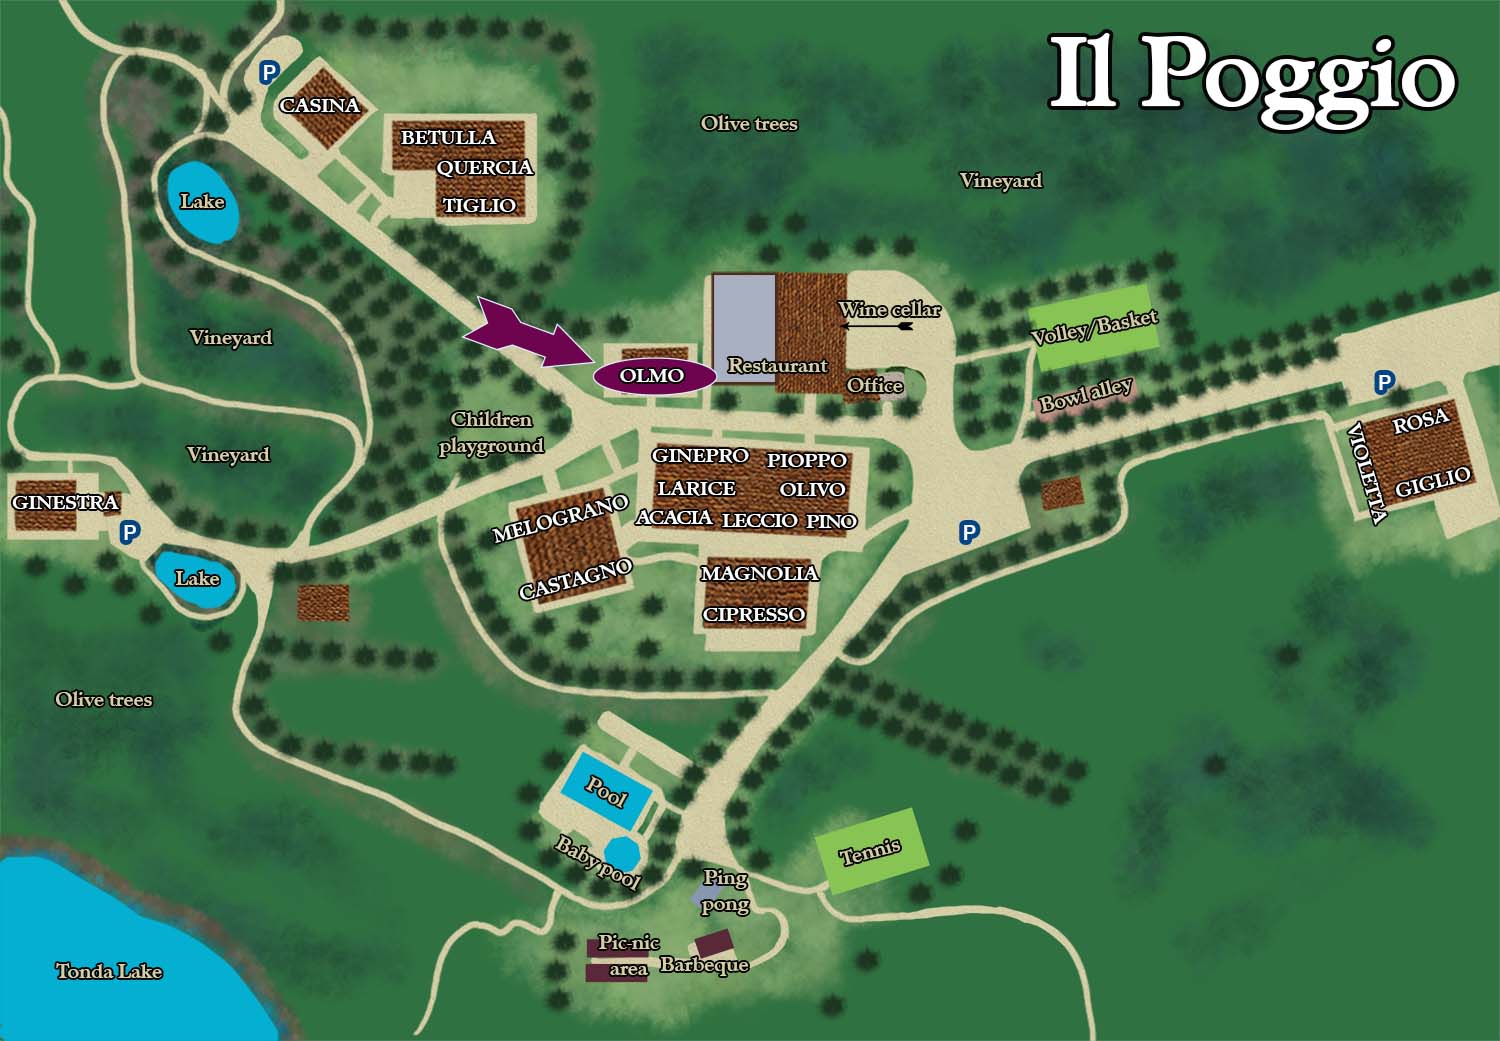 A map of the grounds of il poggibonsi